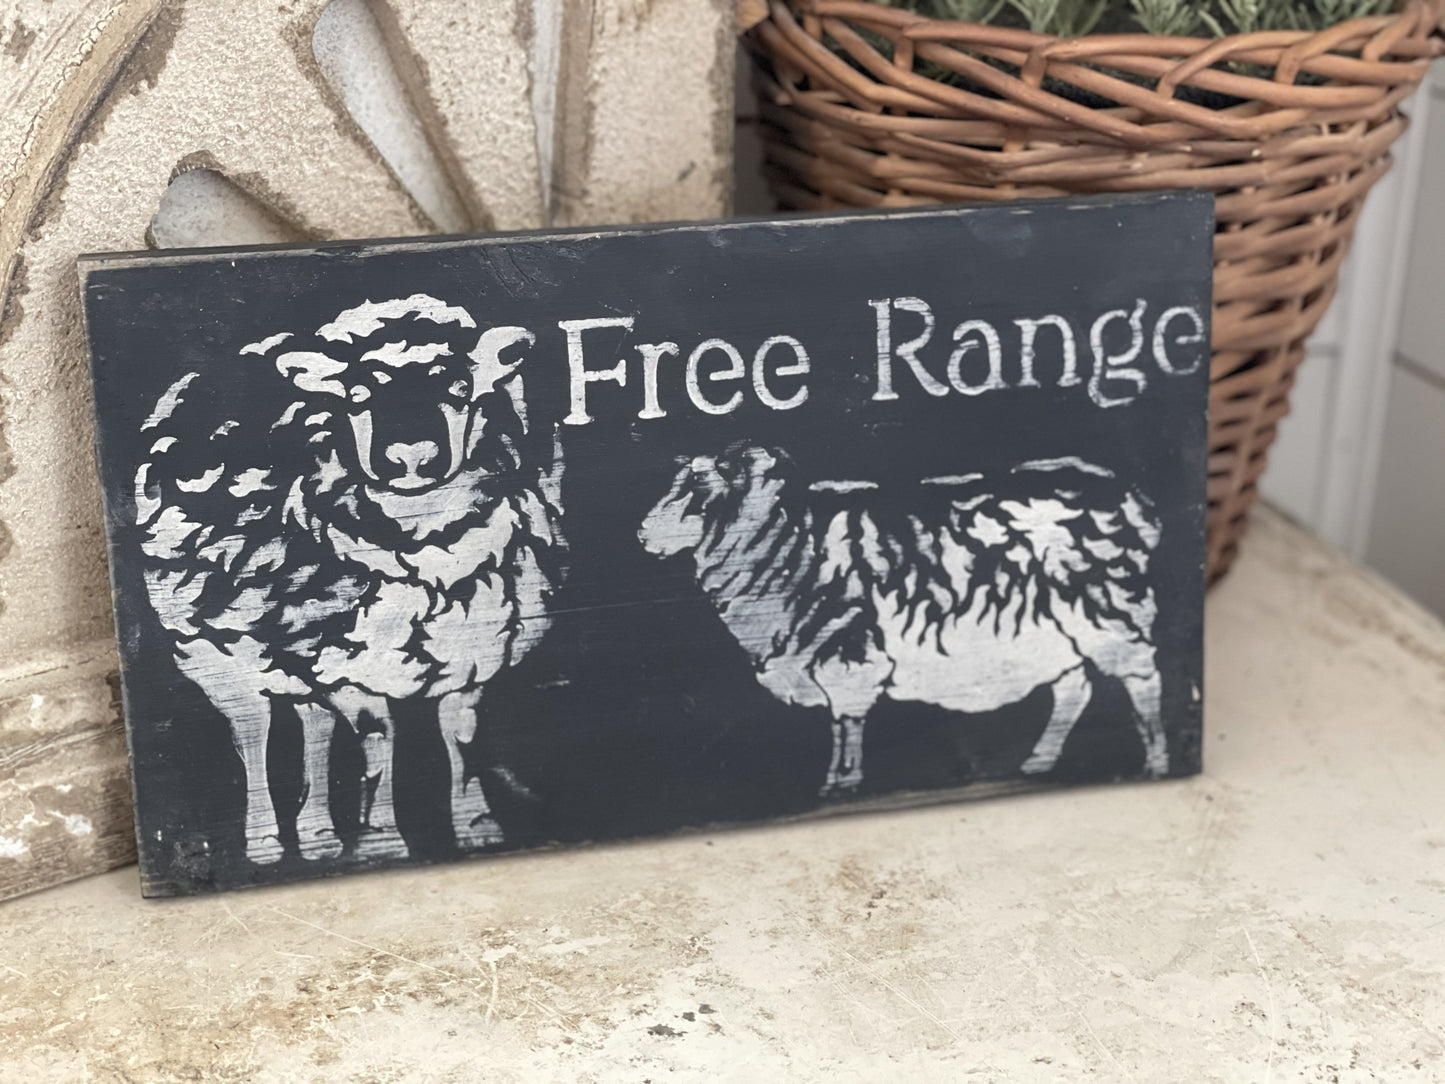 Hand painted signs